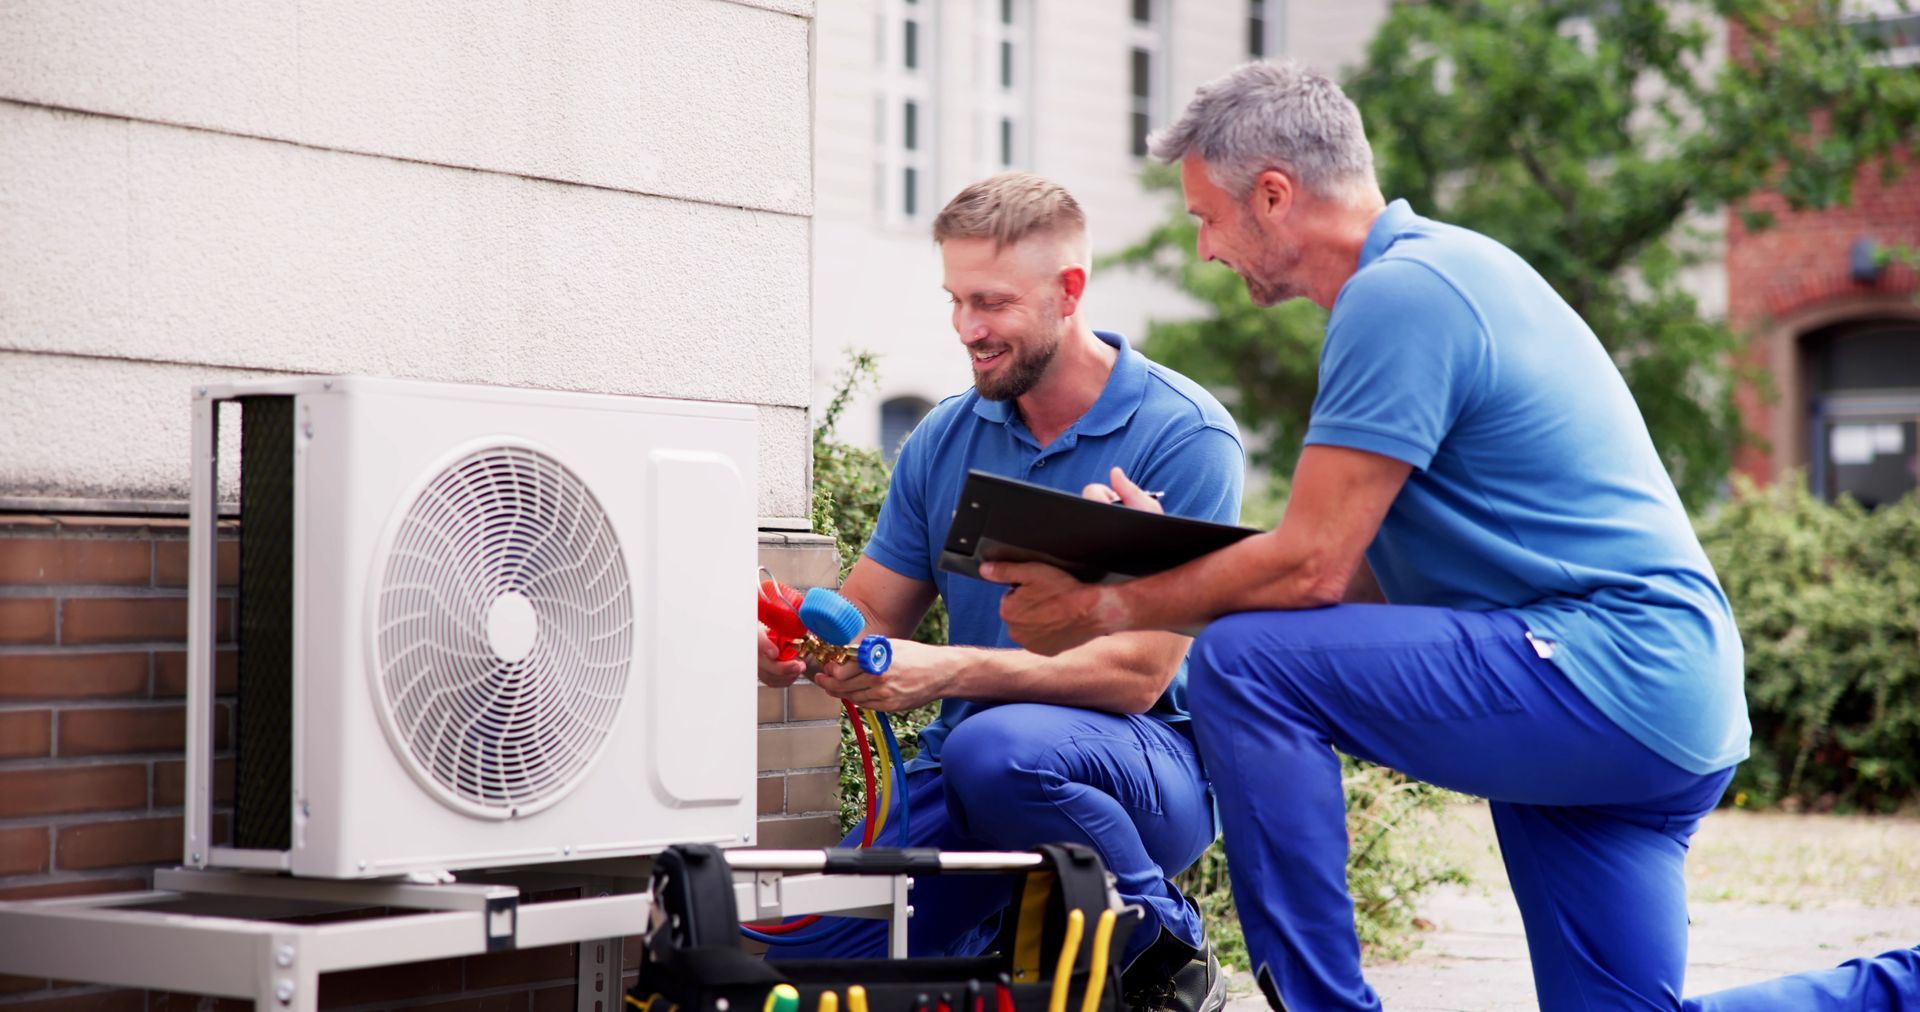 two men are working on an air conditioner outside of a building .